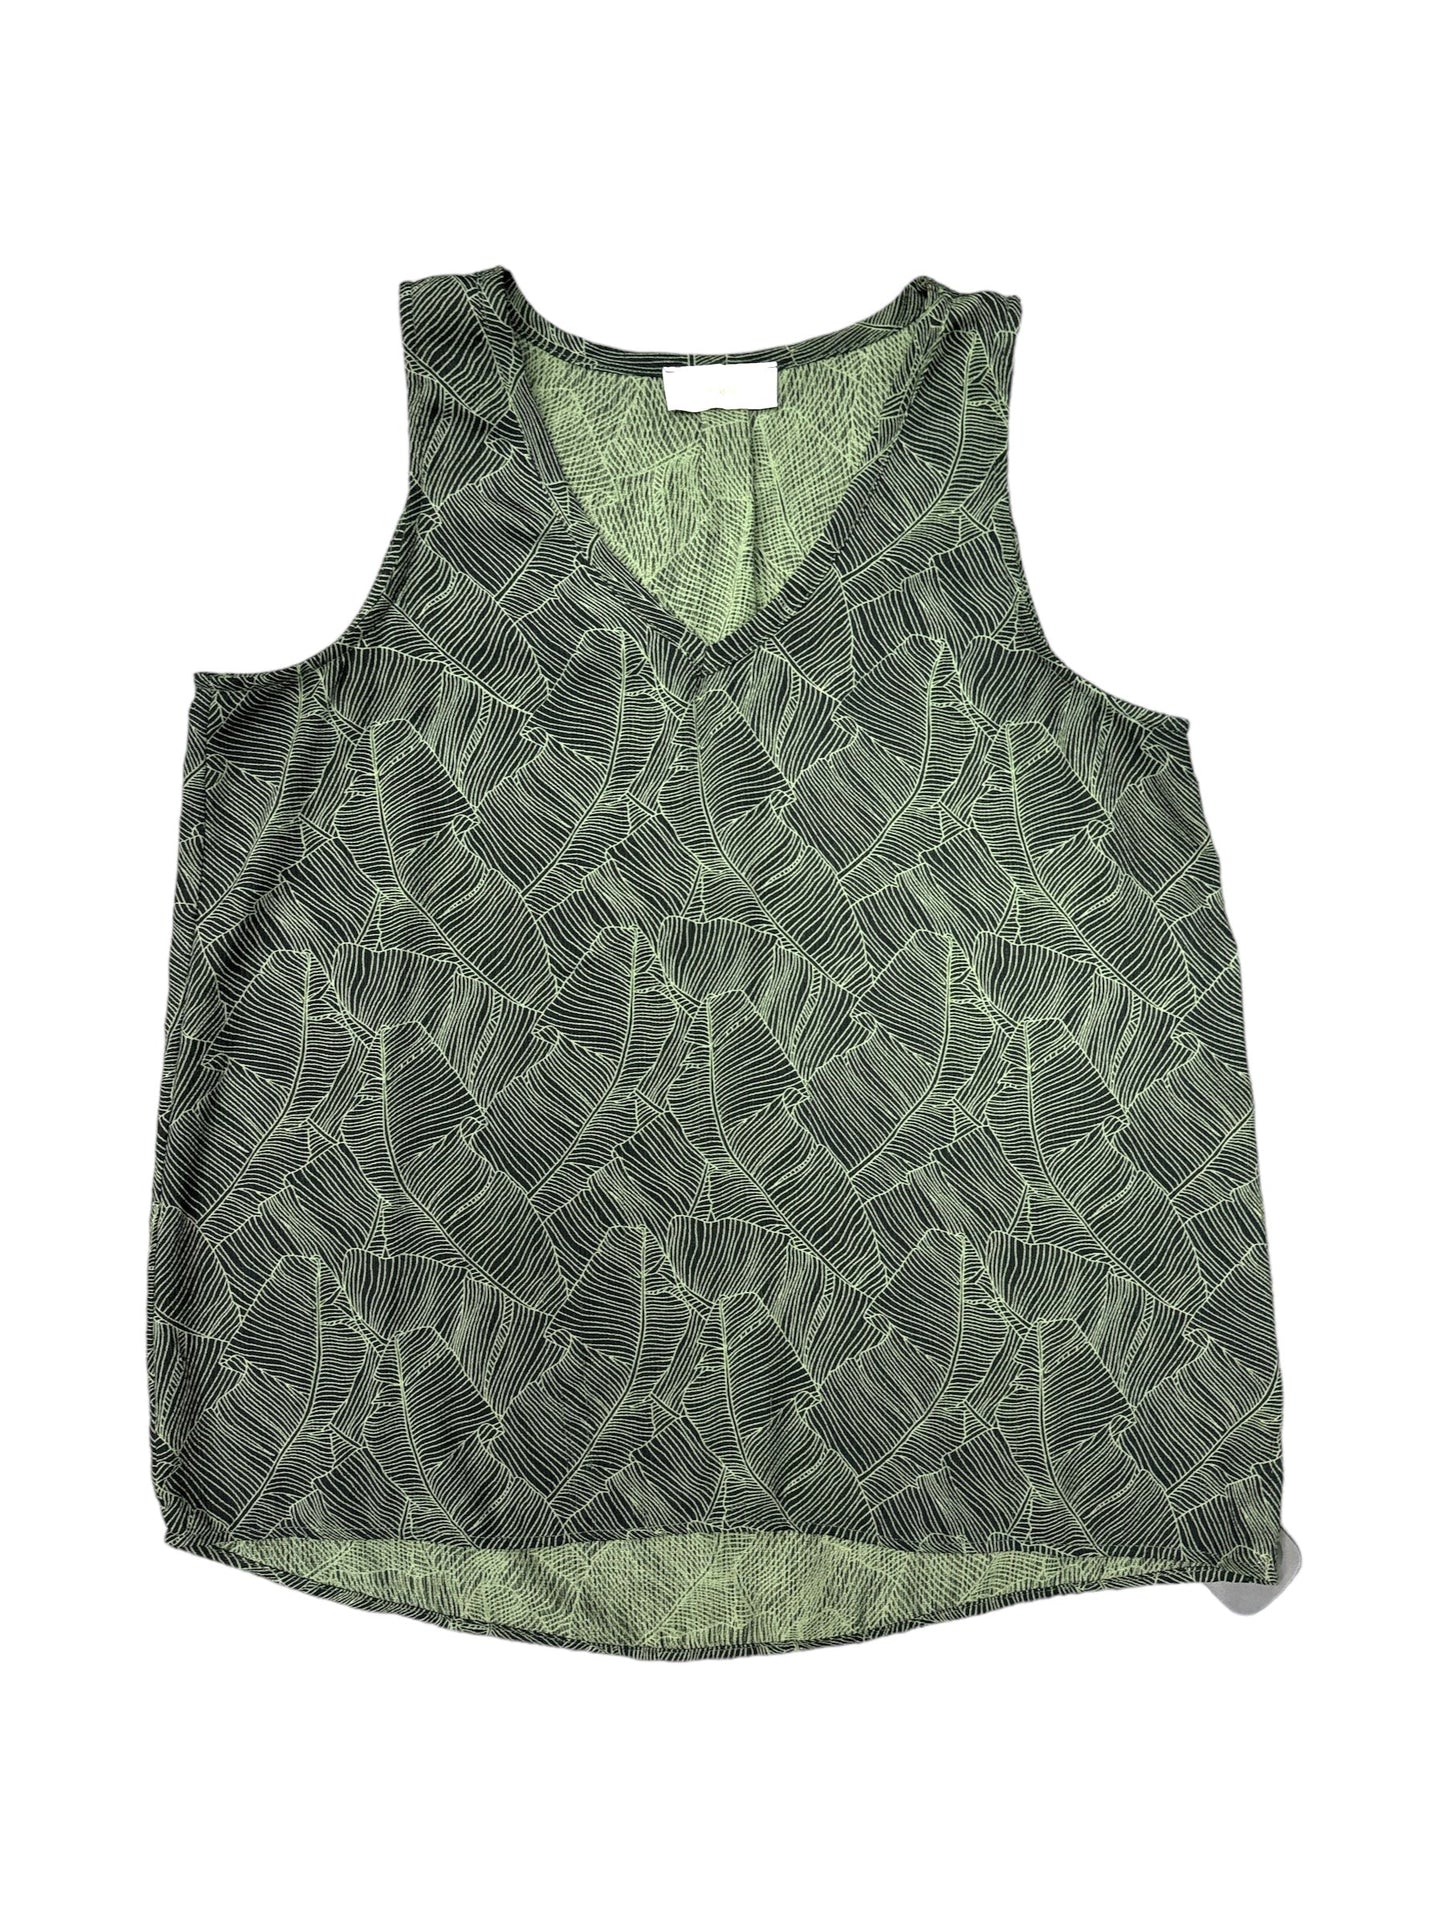 Green Tank Top Braeve, Size S